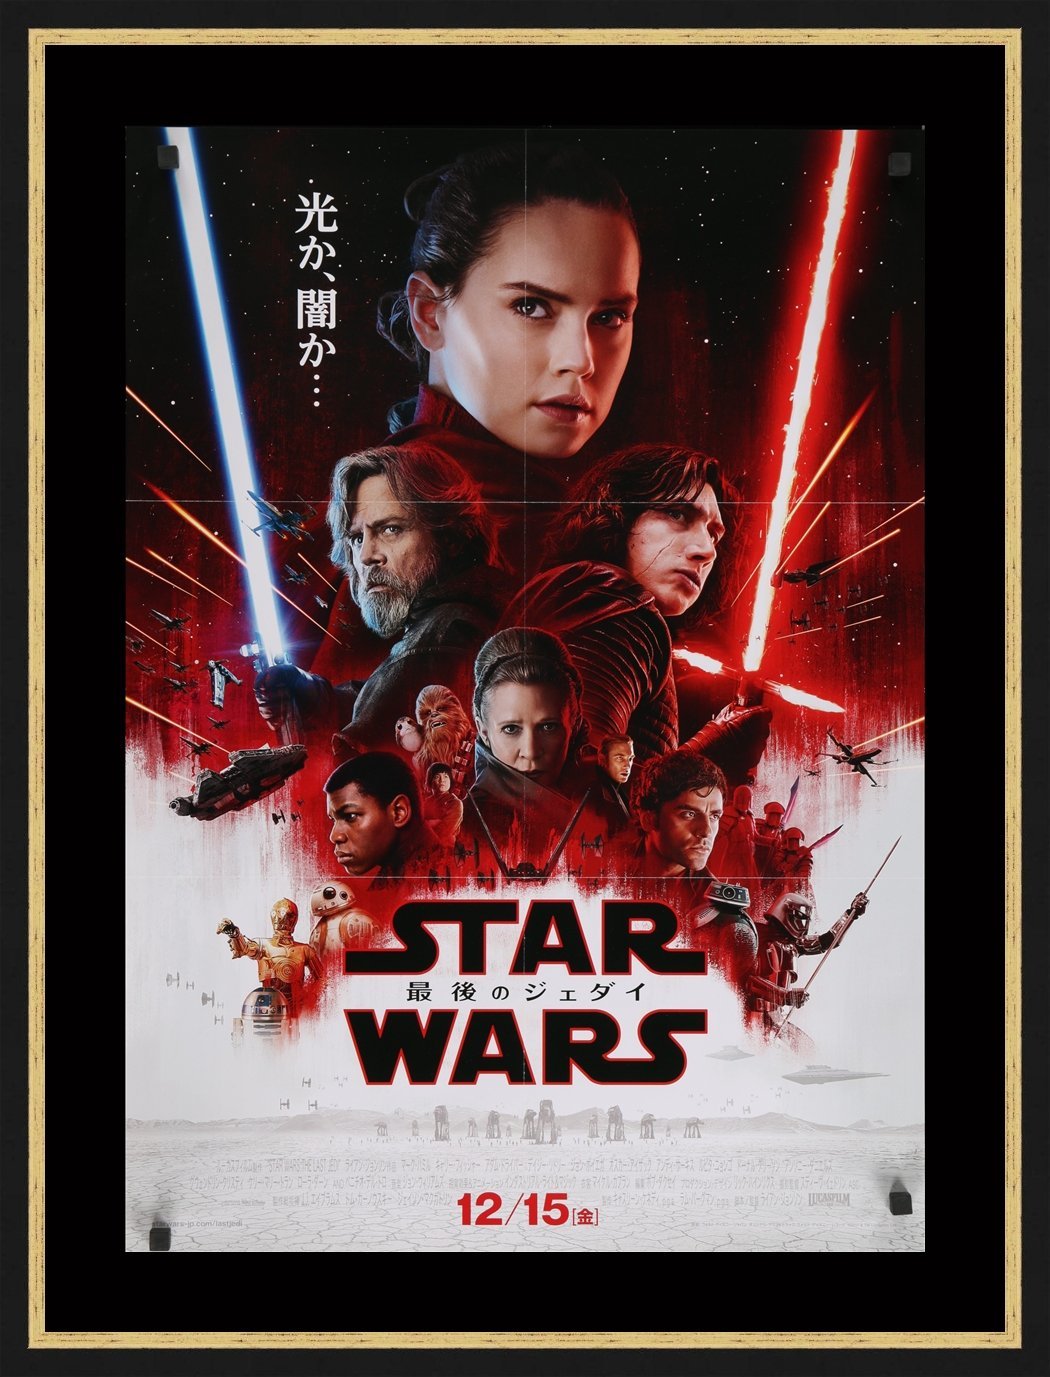 An Original Japanese B2 Movie Poster for the film, Star Wars, The Last Jedi.